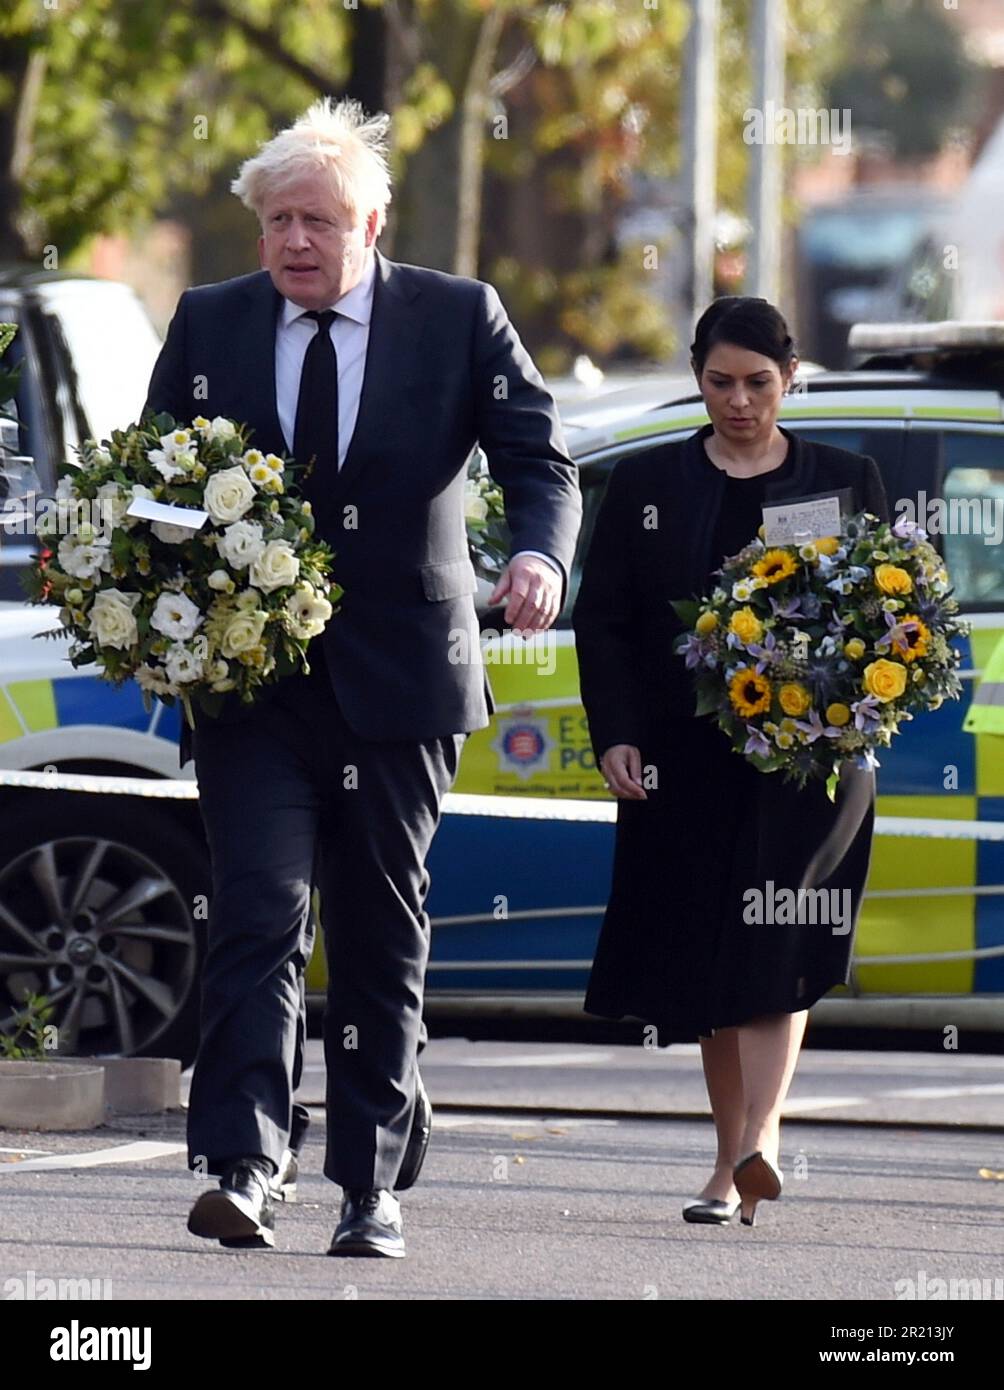 Prime Minister Boris Johnson, and Home Secretary Priti Patel, lay floral tributes near Belfairs Methodist Church in Eastwood Road North, Leigh on Sea, Southend on Sea, Essex after Conservative MP Sir David Amess died having being stabbed multiple times at his constituency surgery. October, 2021. Stock Photo